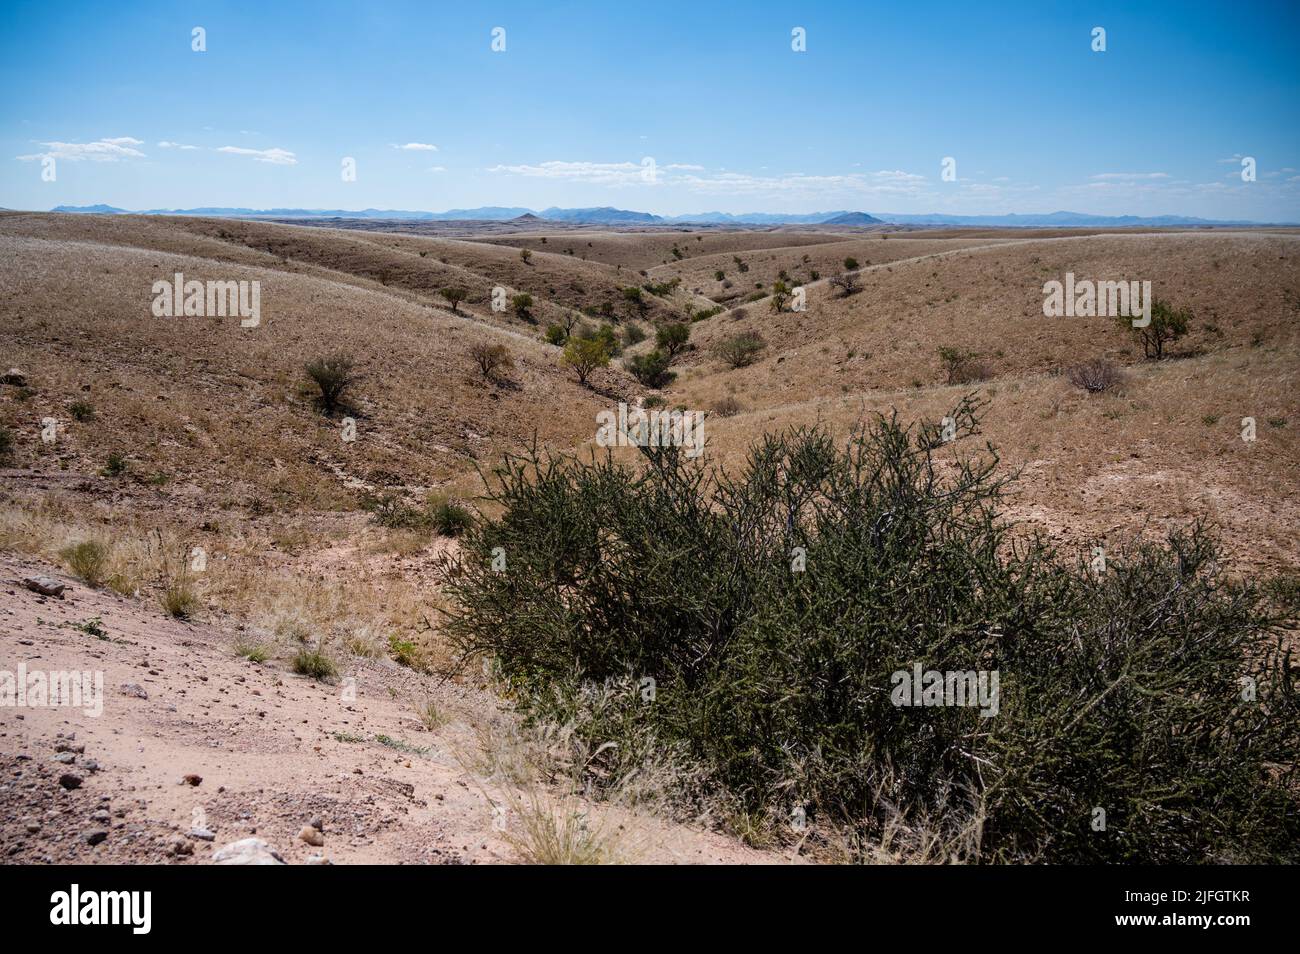 View from the viewpoint at the Kuiseb Pass in Namibia Africa Stock Photo